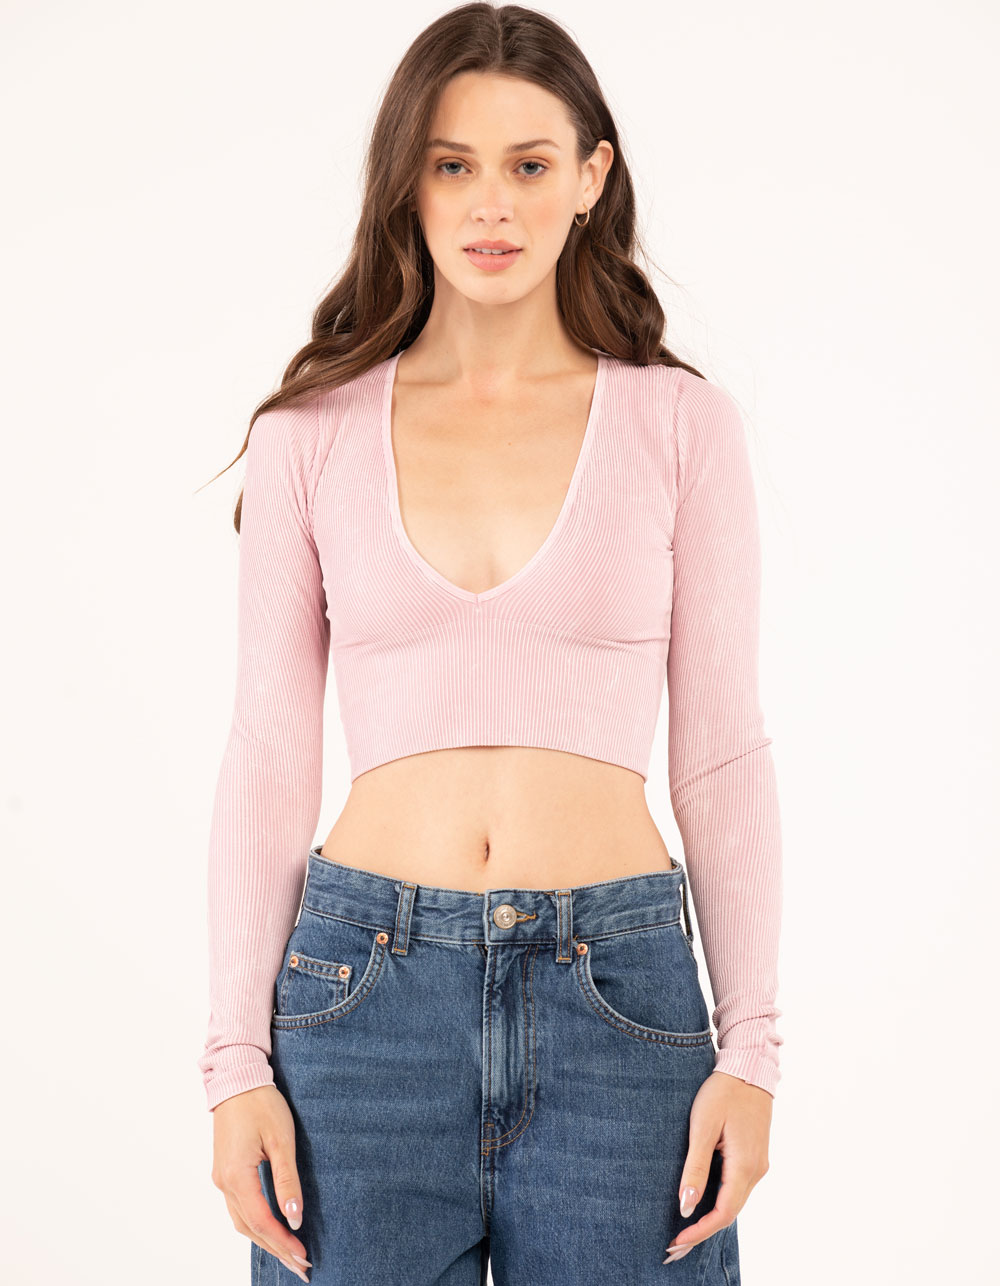 BDG Urban Outfitters Josie Womens Top - DUSTY PINK